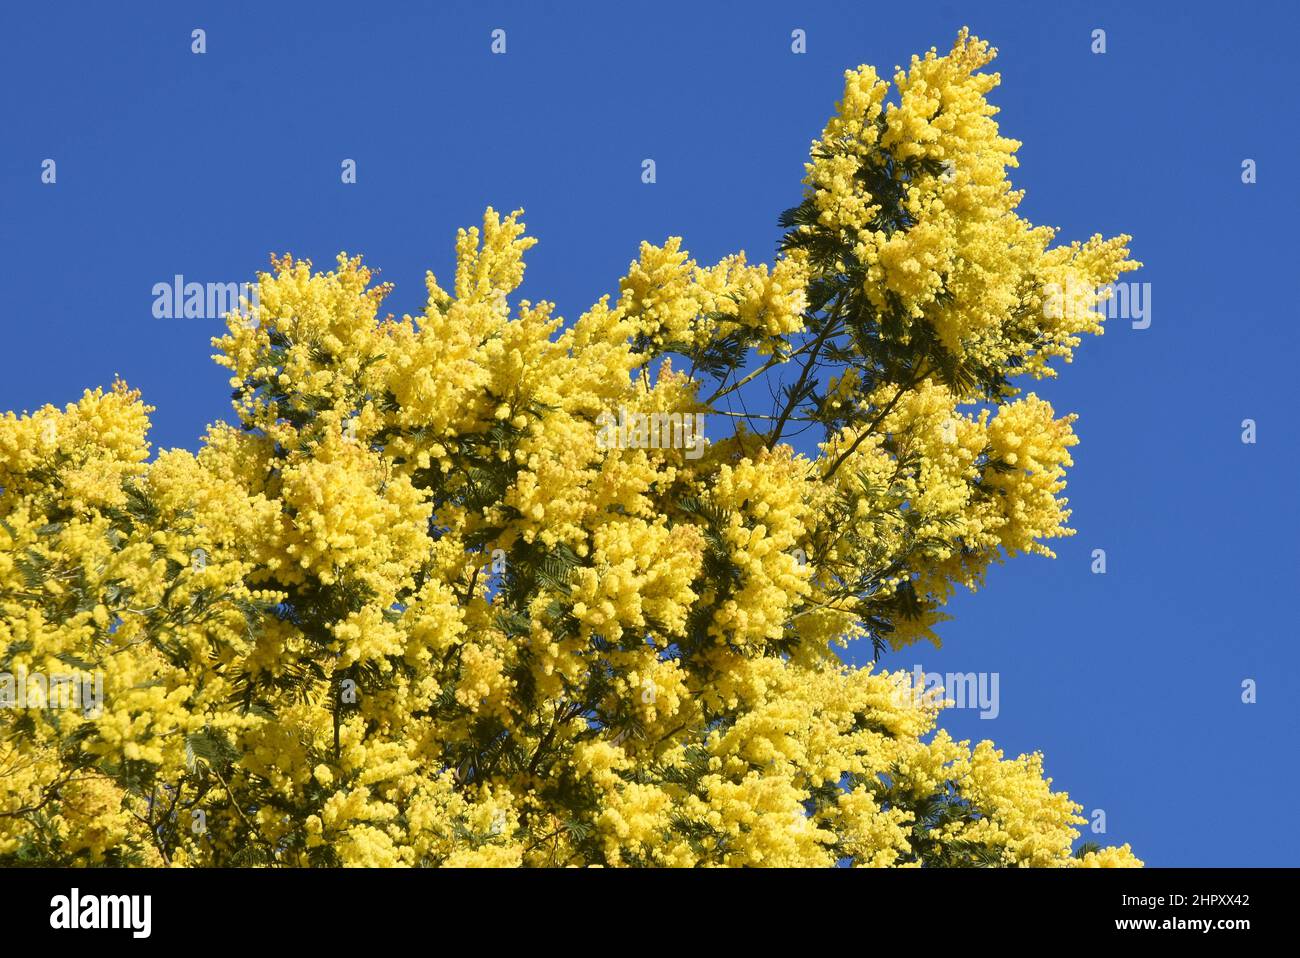 France, french riviera, Tanneroin, mimosa, imported from Australia the mimosa bloomed in winter with a beautiful sunny yellow color. Stock Photo